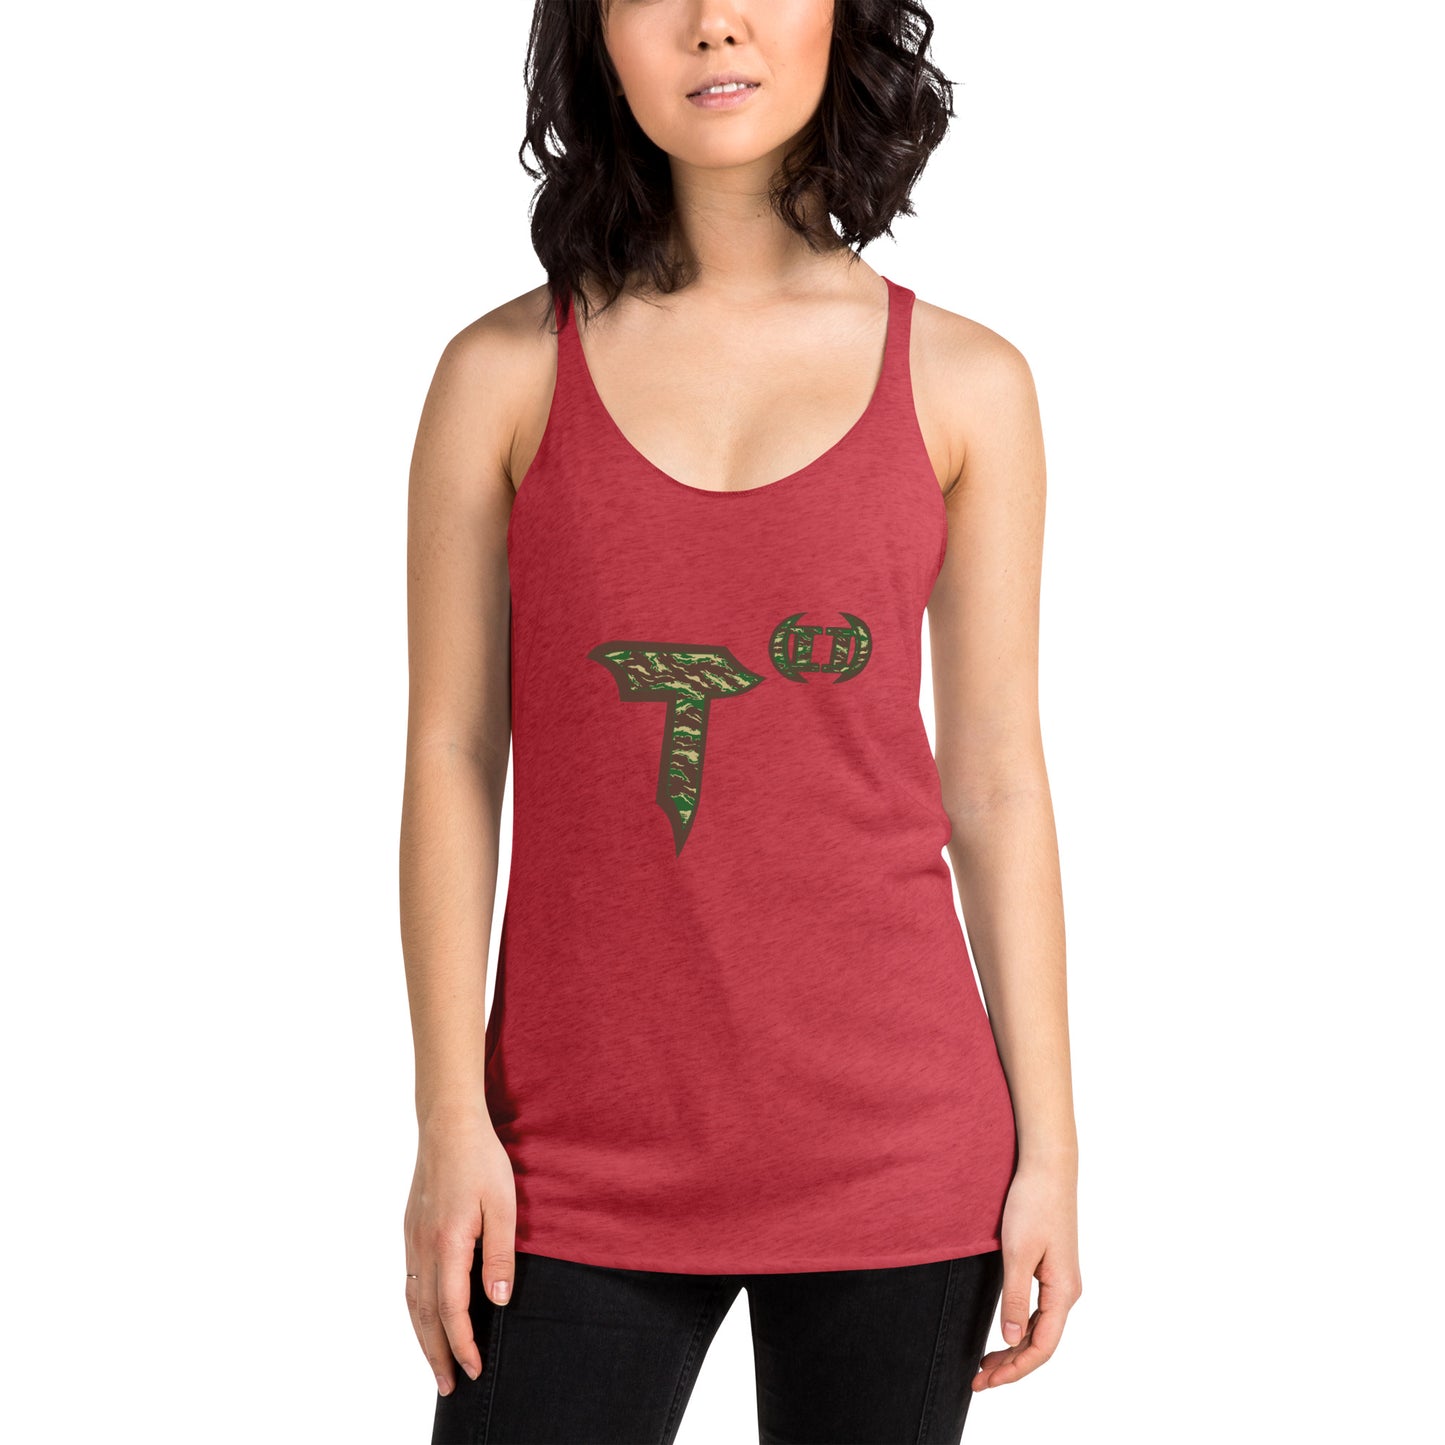 Next Level Women's Racerback Tank "T(2)" Tiger Stripe Can't See Me Edition